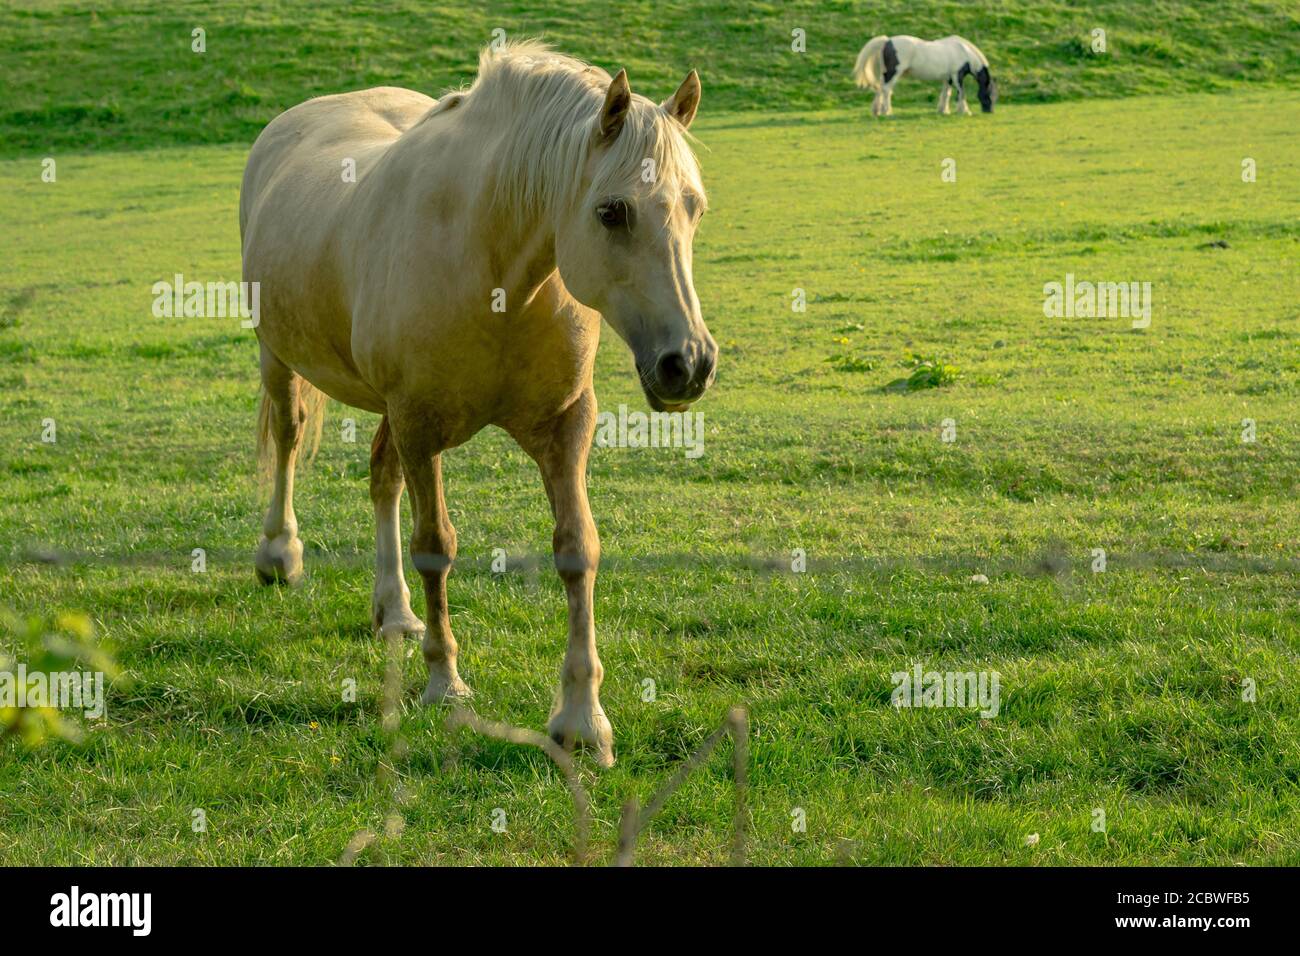 The horse is grazing on the field Stock Photo